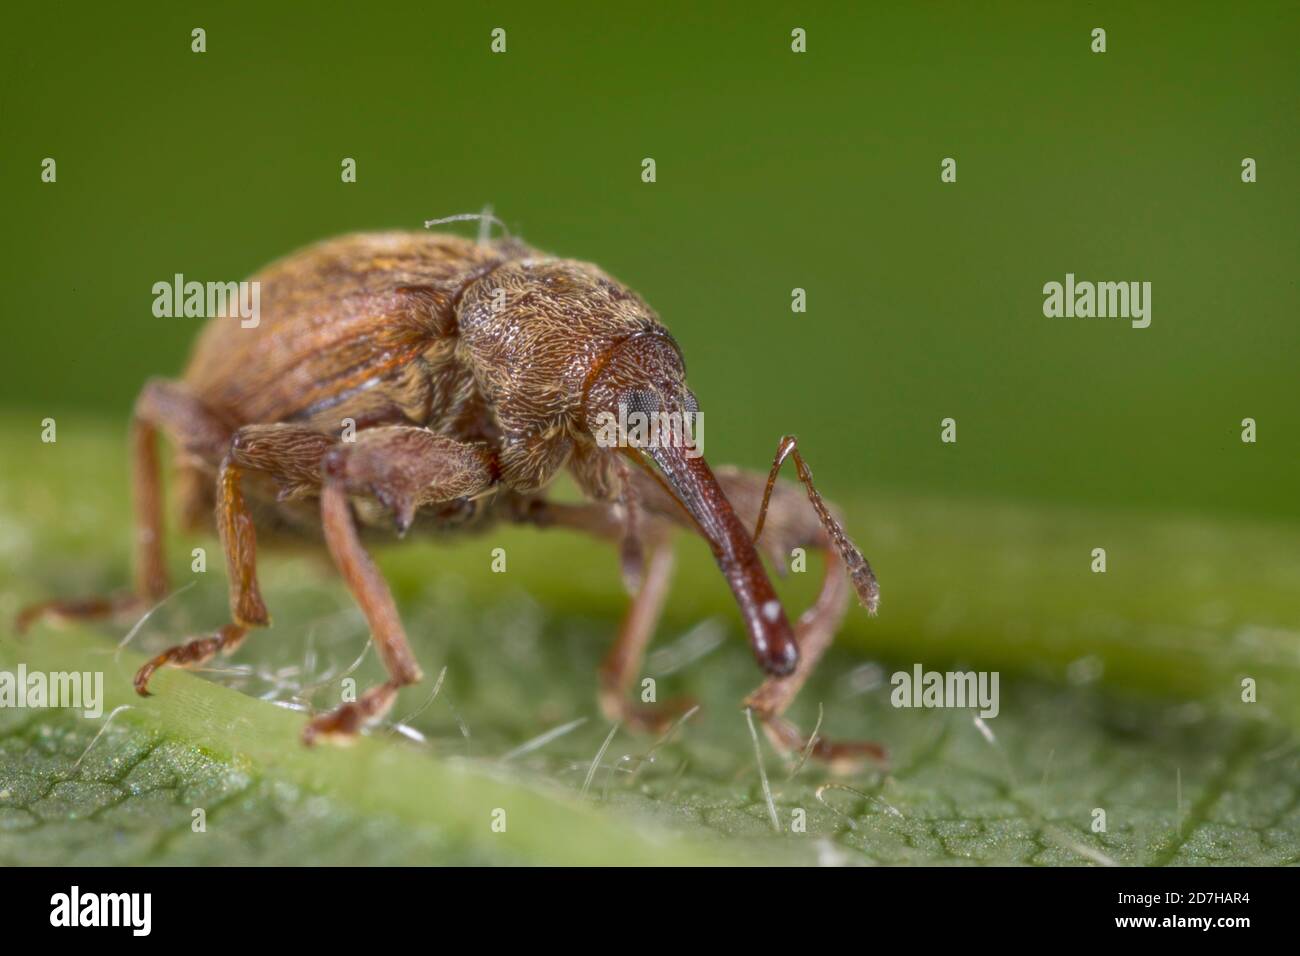 snout beetle (Anthonomus pinivorax), sits on a leaf, Germany Stock Photo